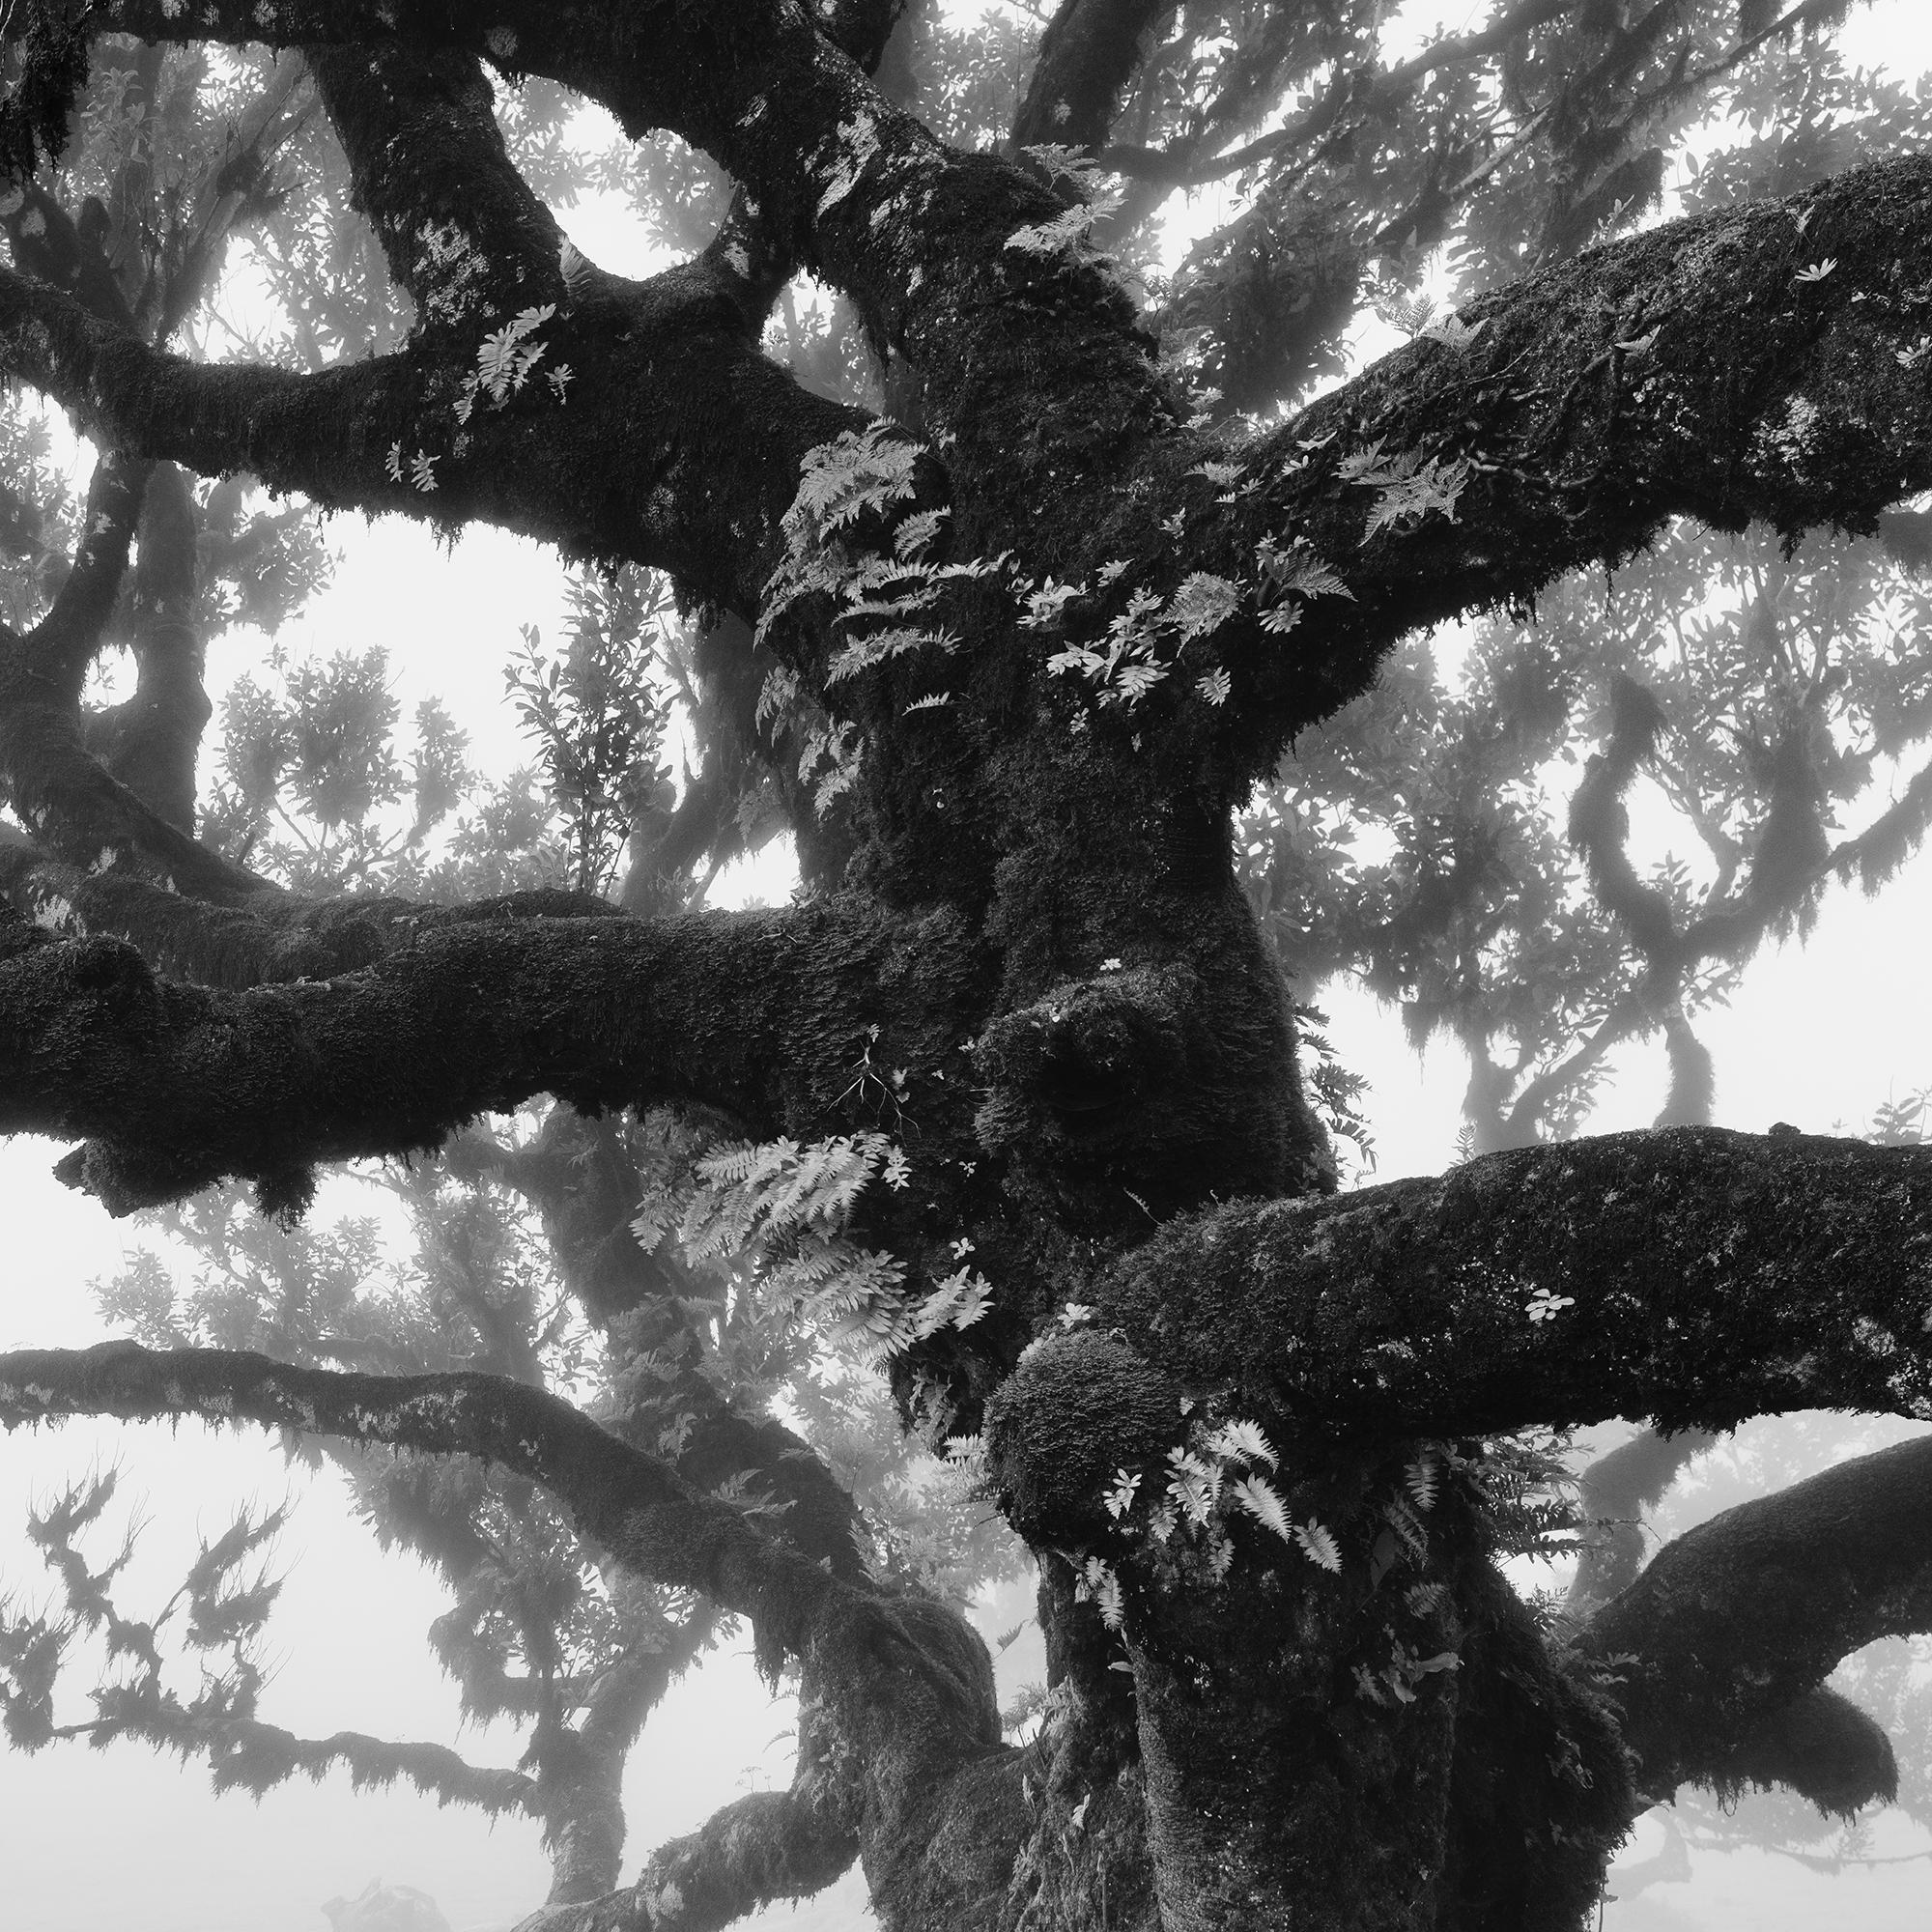 Ancient Laurisilva Forest, old Tree, Madeira, black white landscape photography For Sale 3